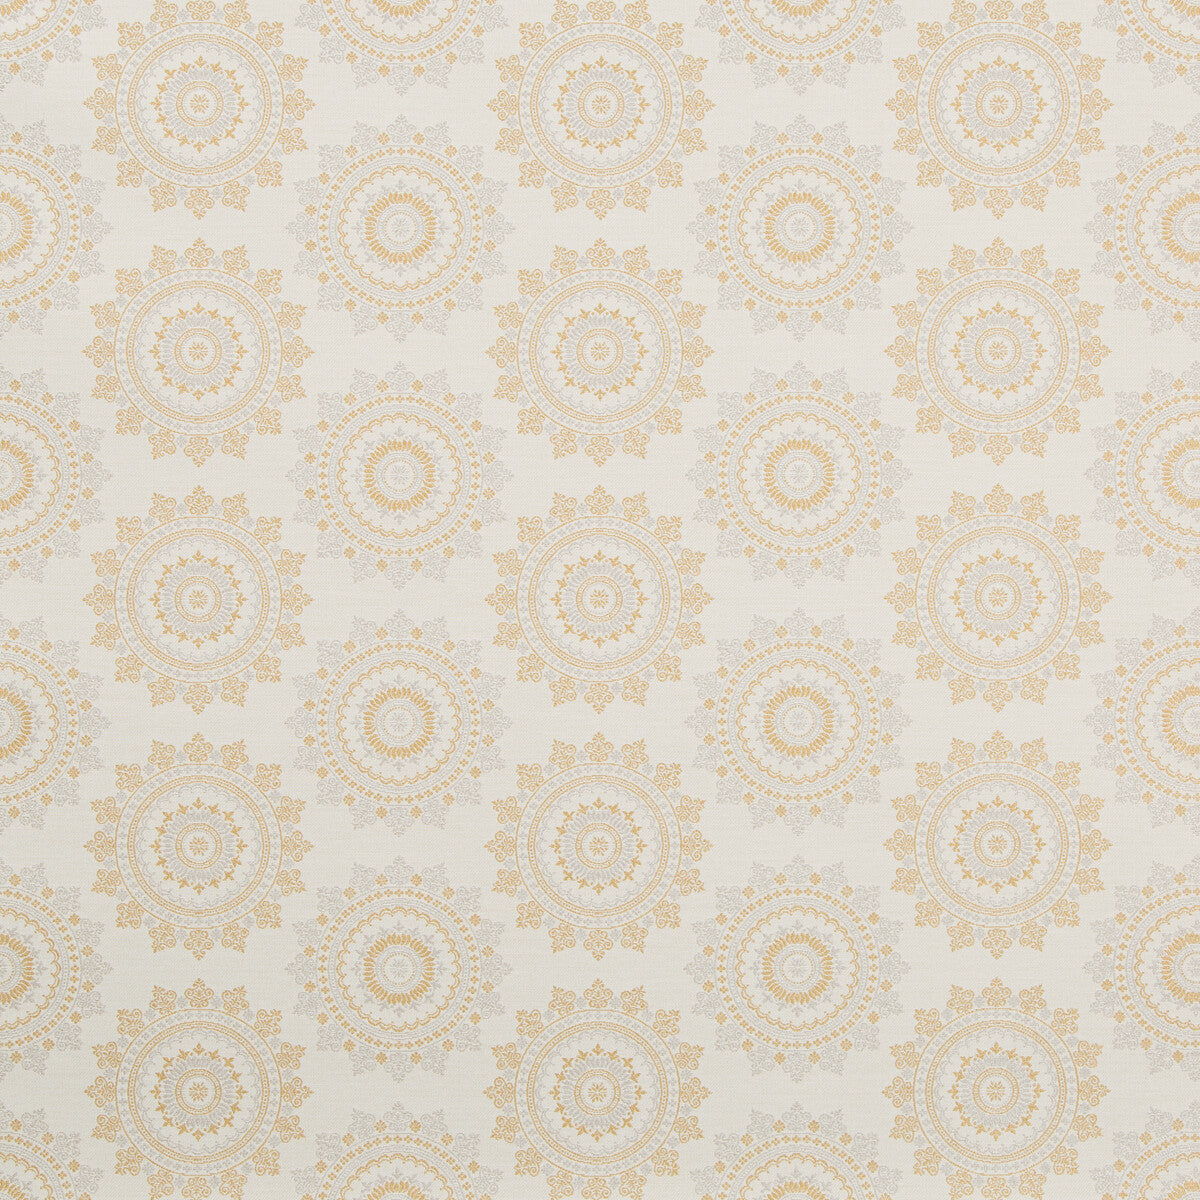 Piatto fabric in gold pearl color - pattern 35865.14.0 - by Kravet Contract in the Gis Crypton Green collection